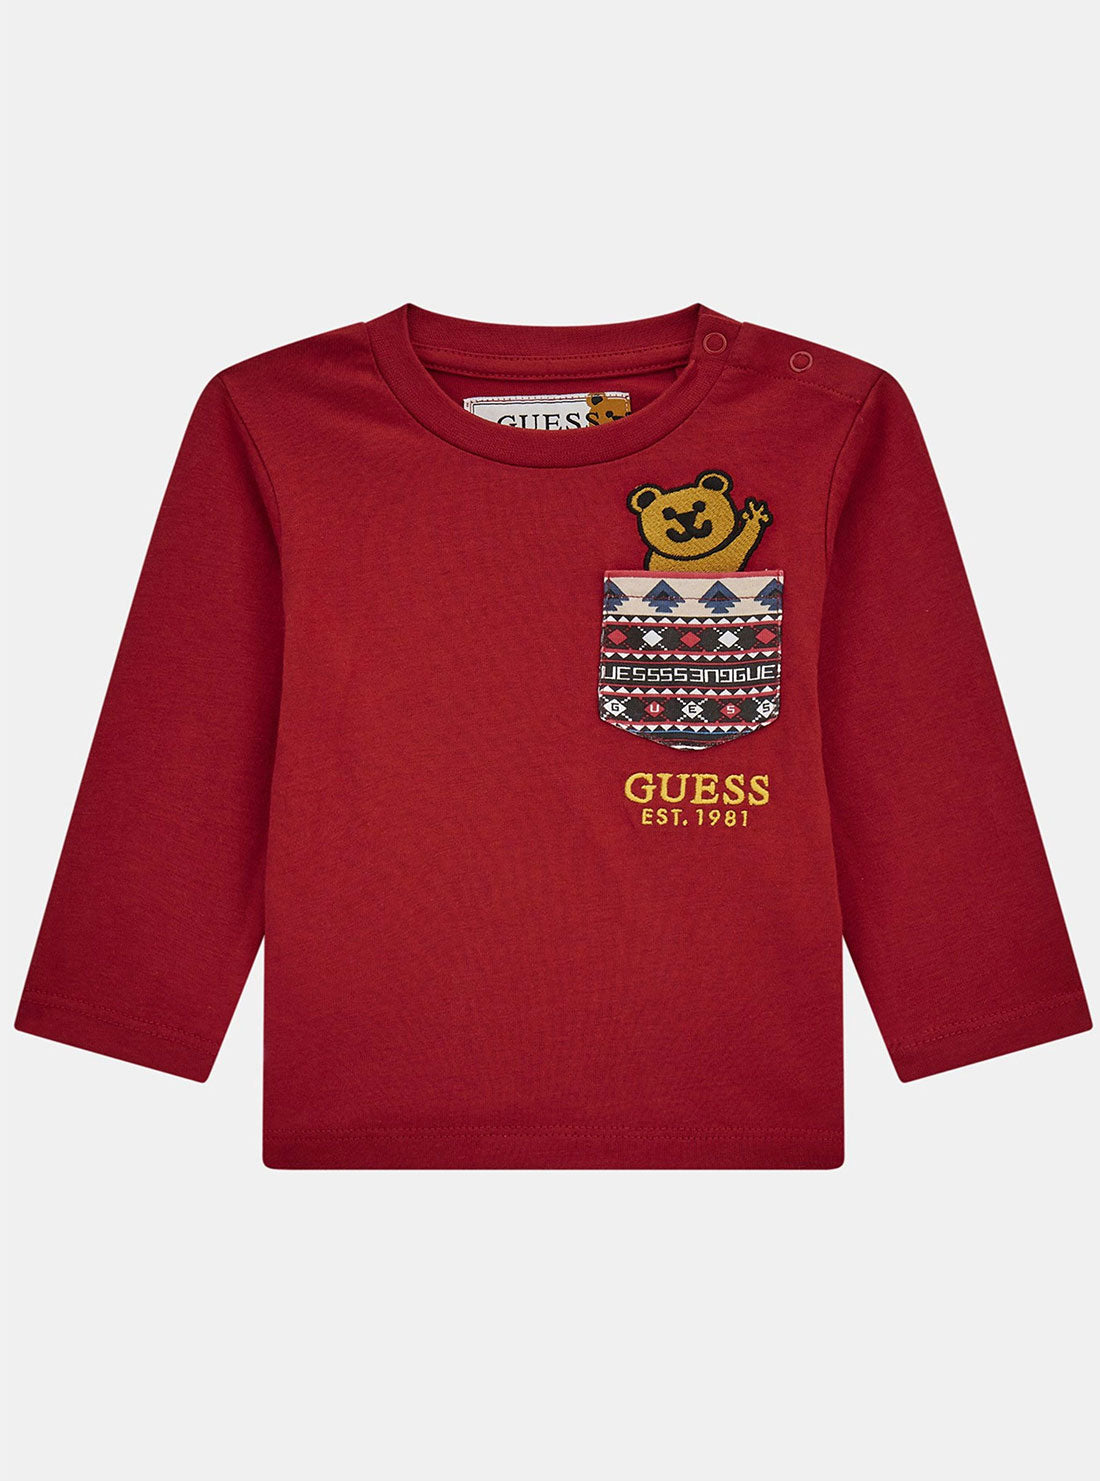 GUESS Red Long Sleeve T-Shirt (3-24M) front view